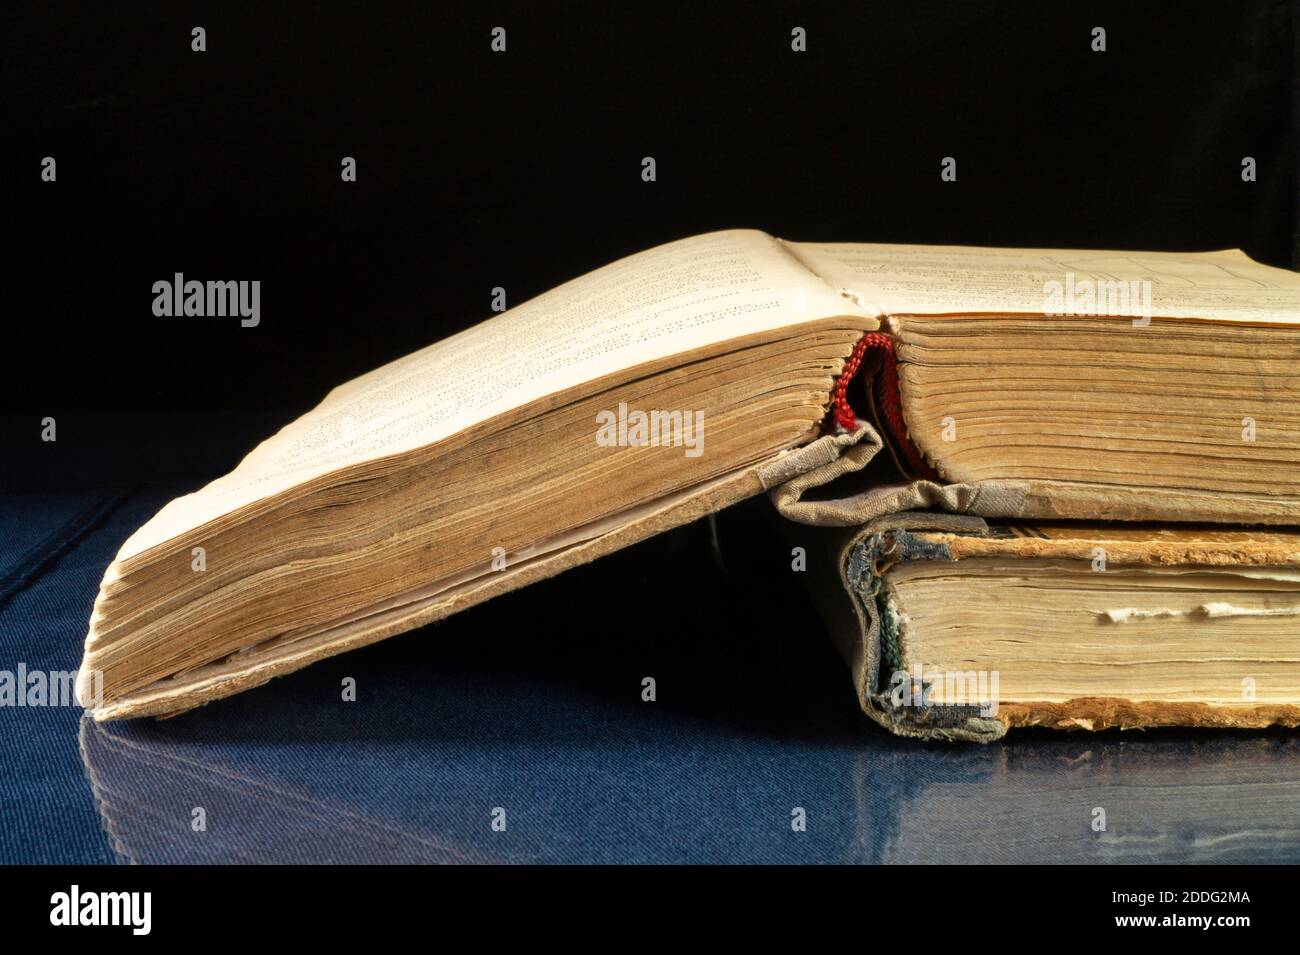 Aging book rests upon glass table with reflection. Subjects on black background close-up Stock Photo